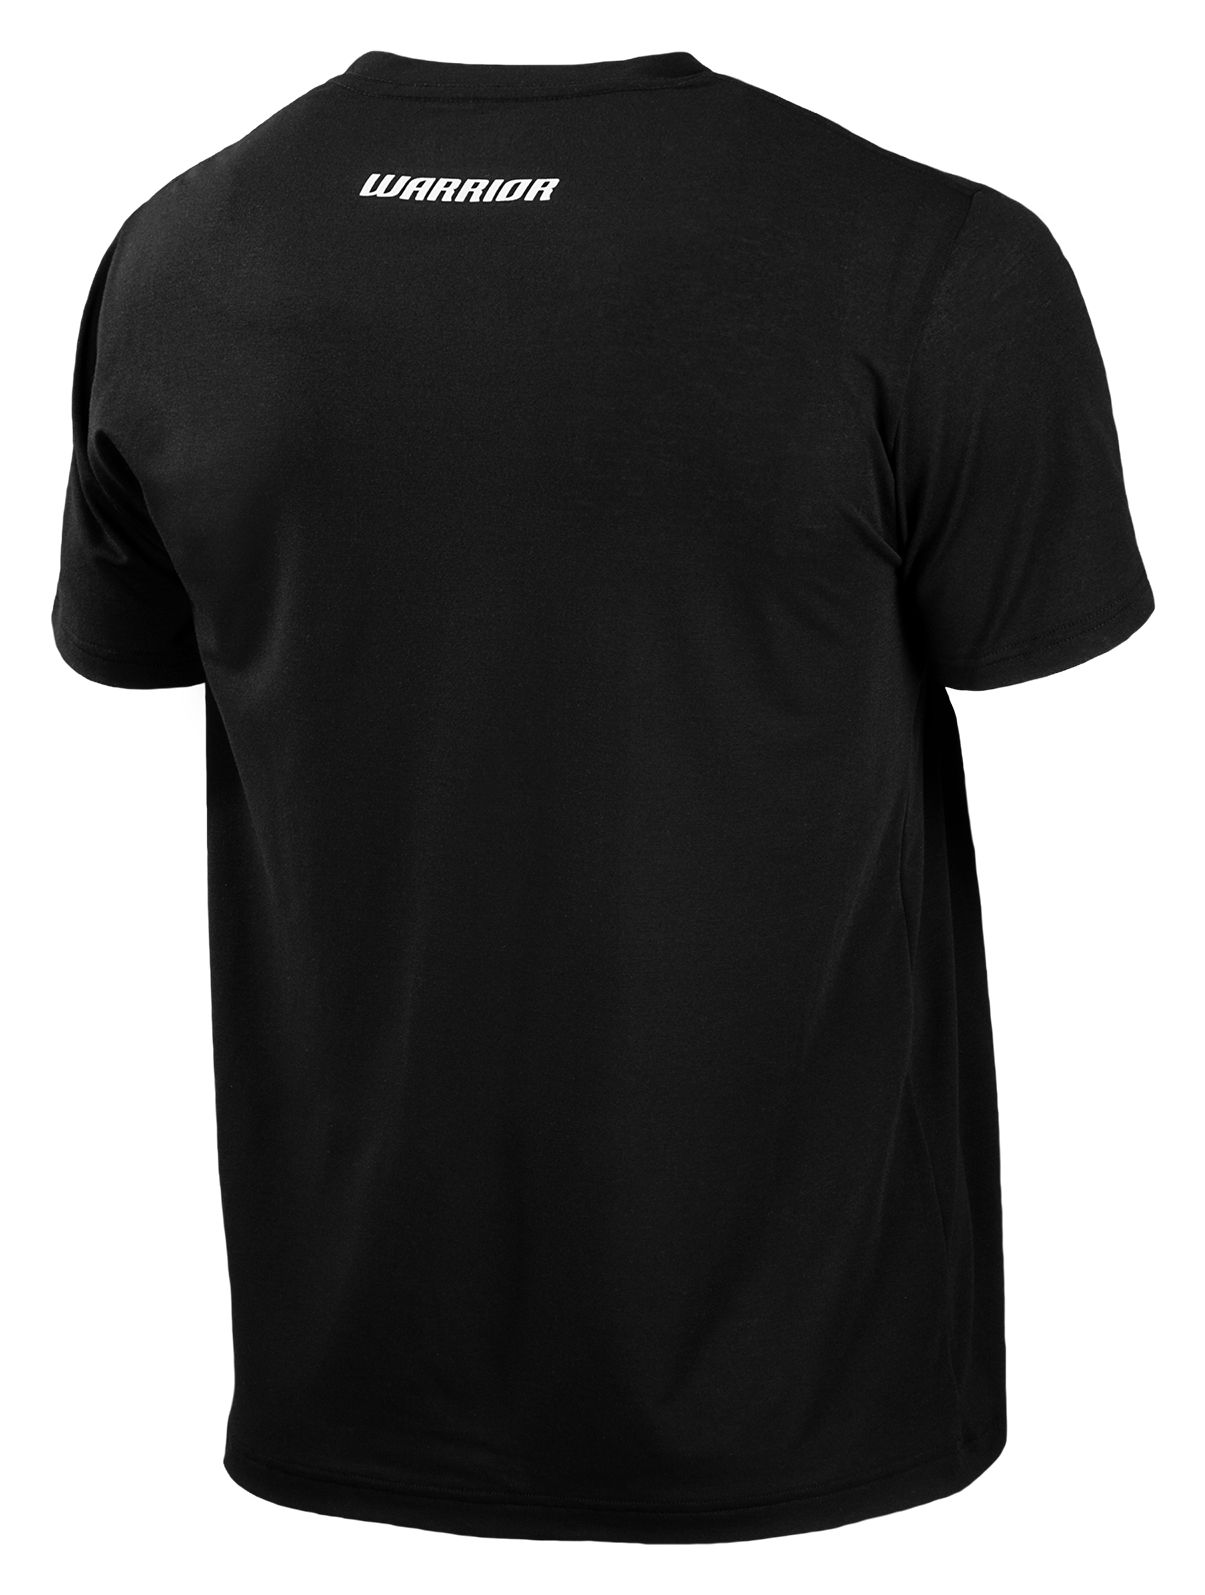 Reflective W Tech Tee, Black image number 0